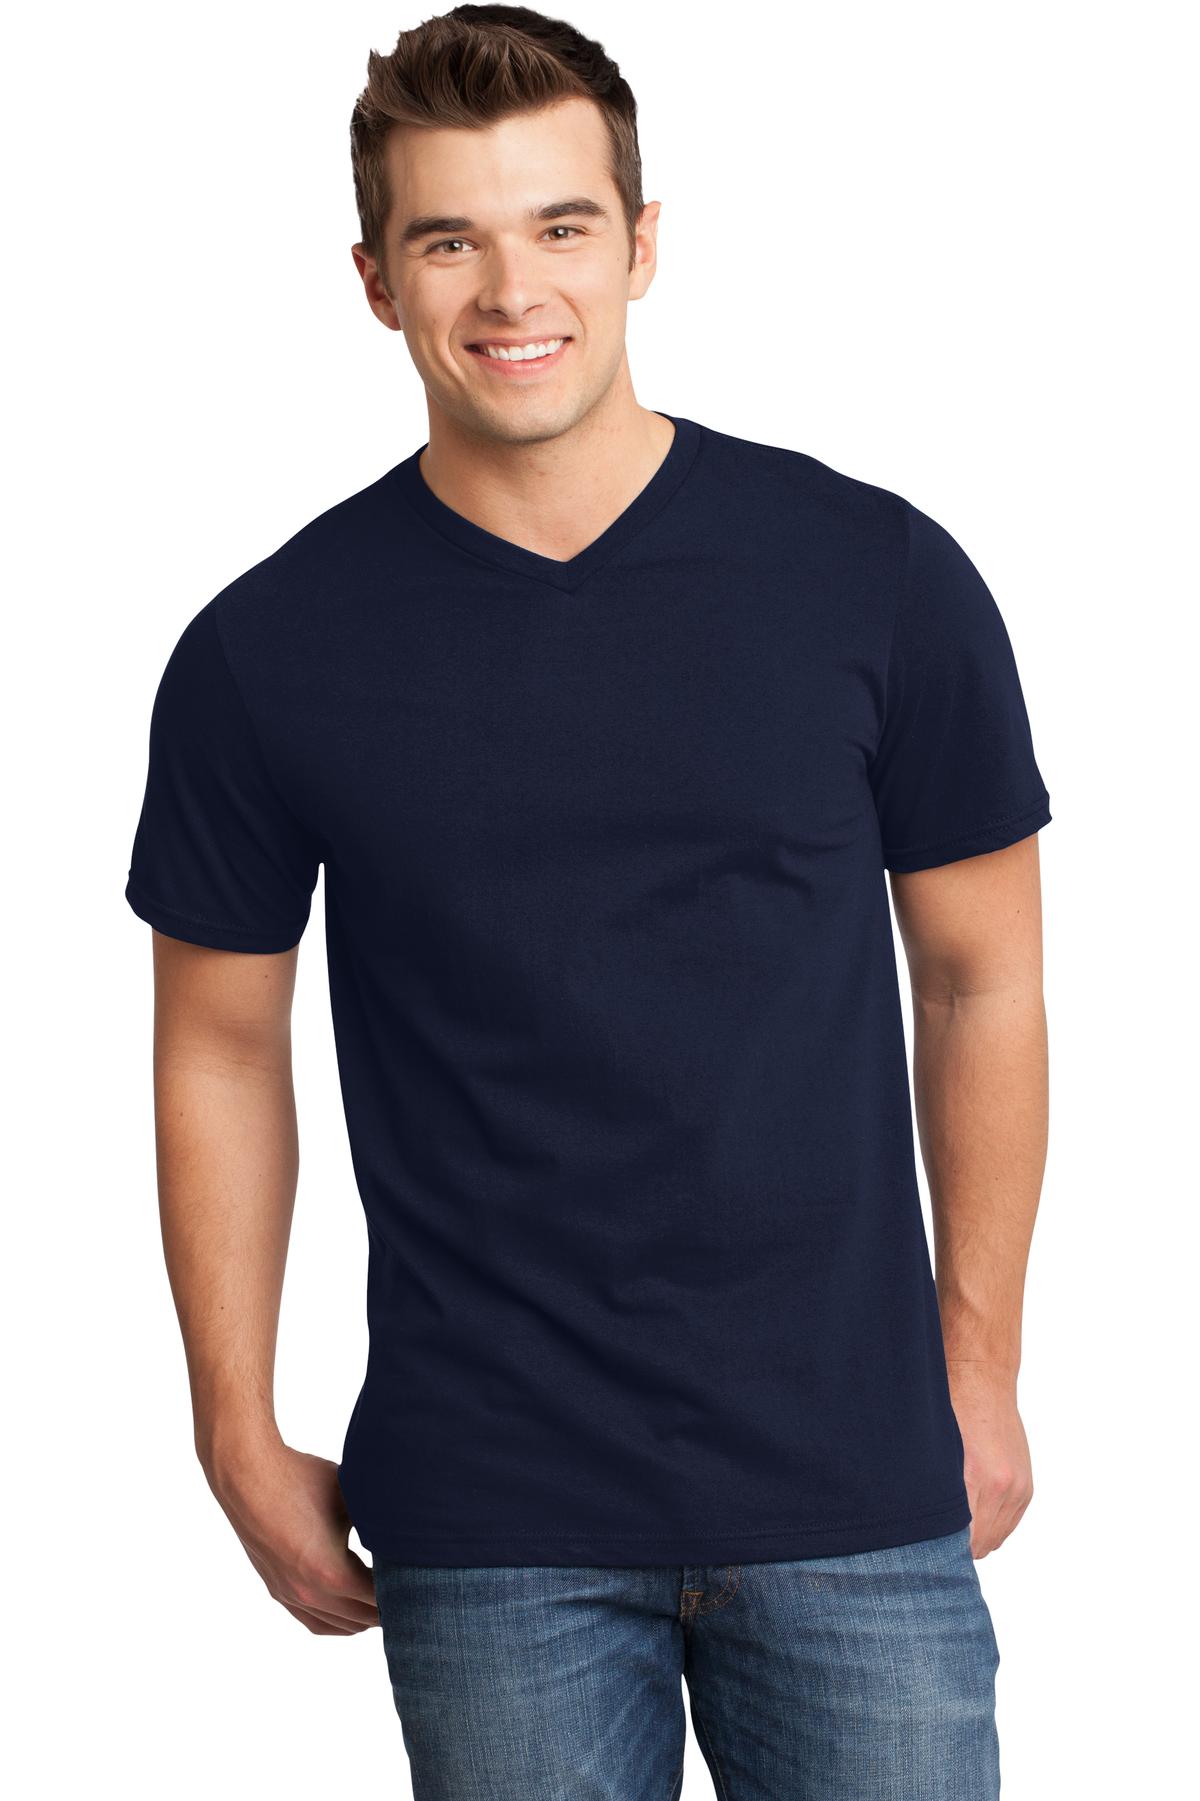 District - Young Mens Very Important Tee V-Neck. DT6500